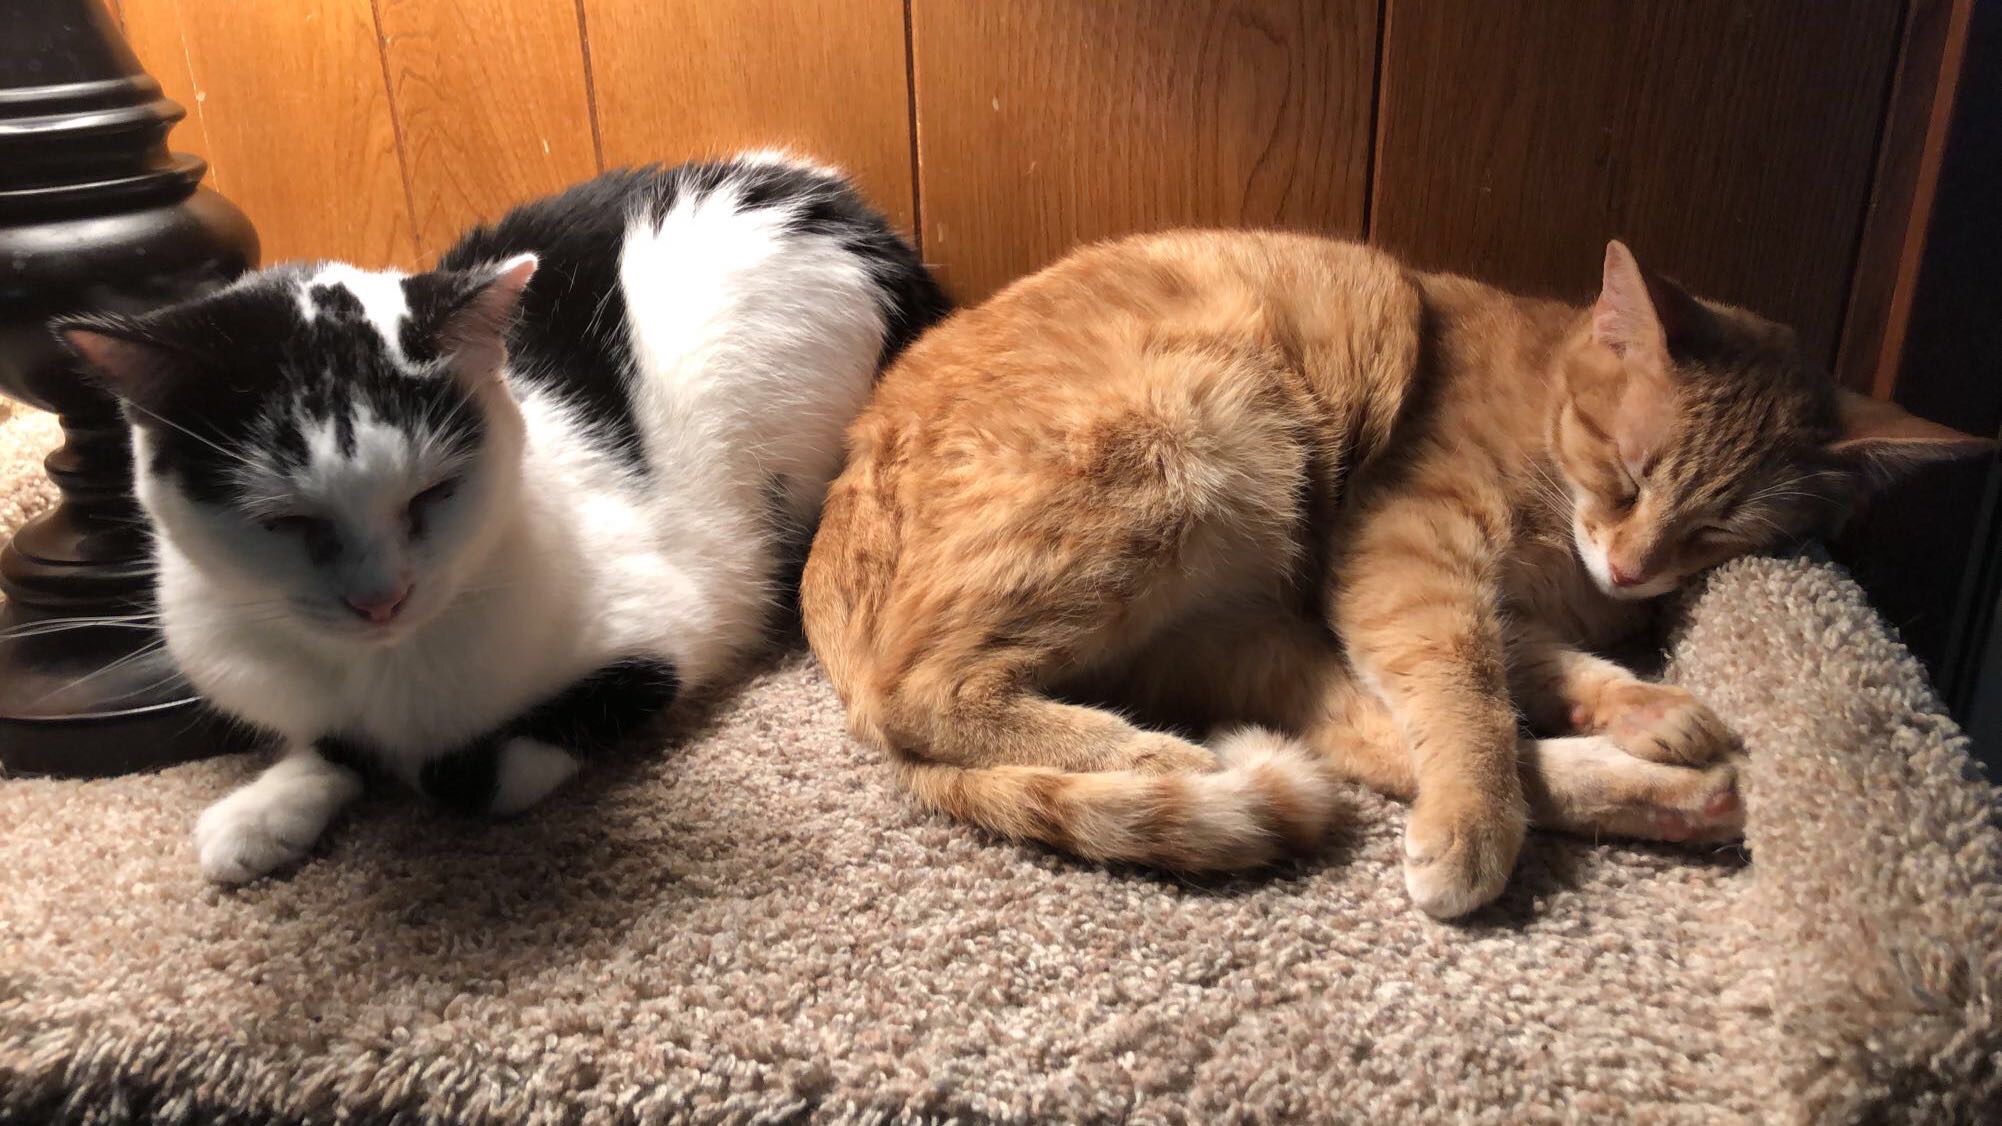 This is Todd (Orange Tabby) and Polly (Black and White fur).